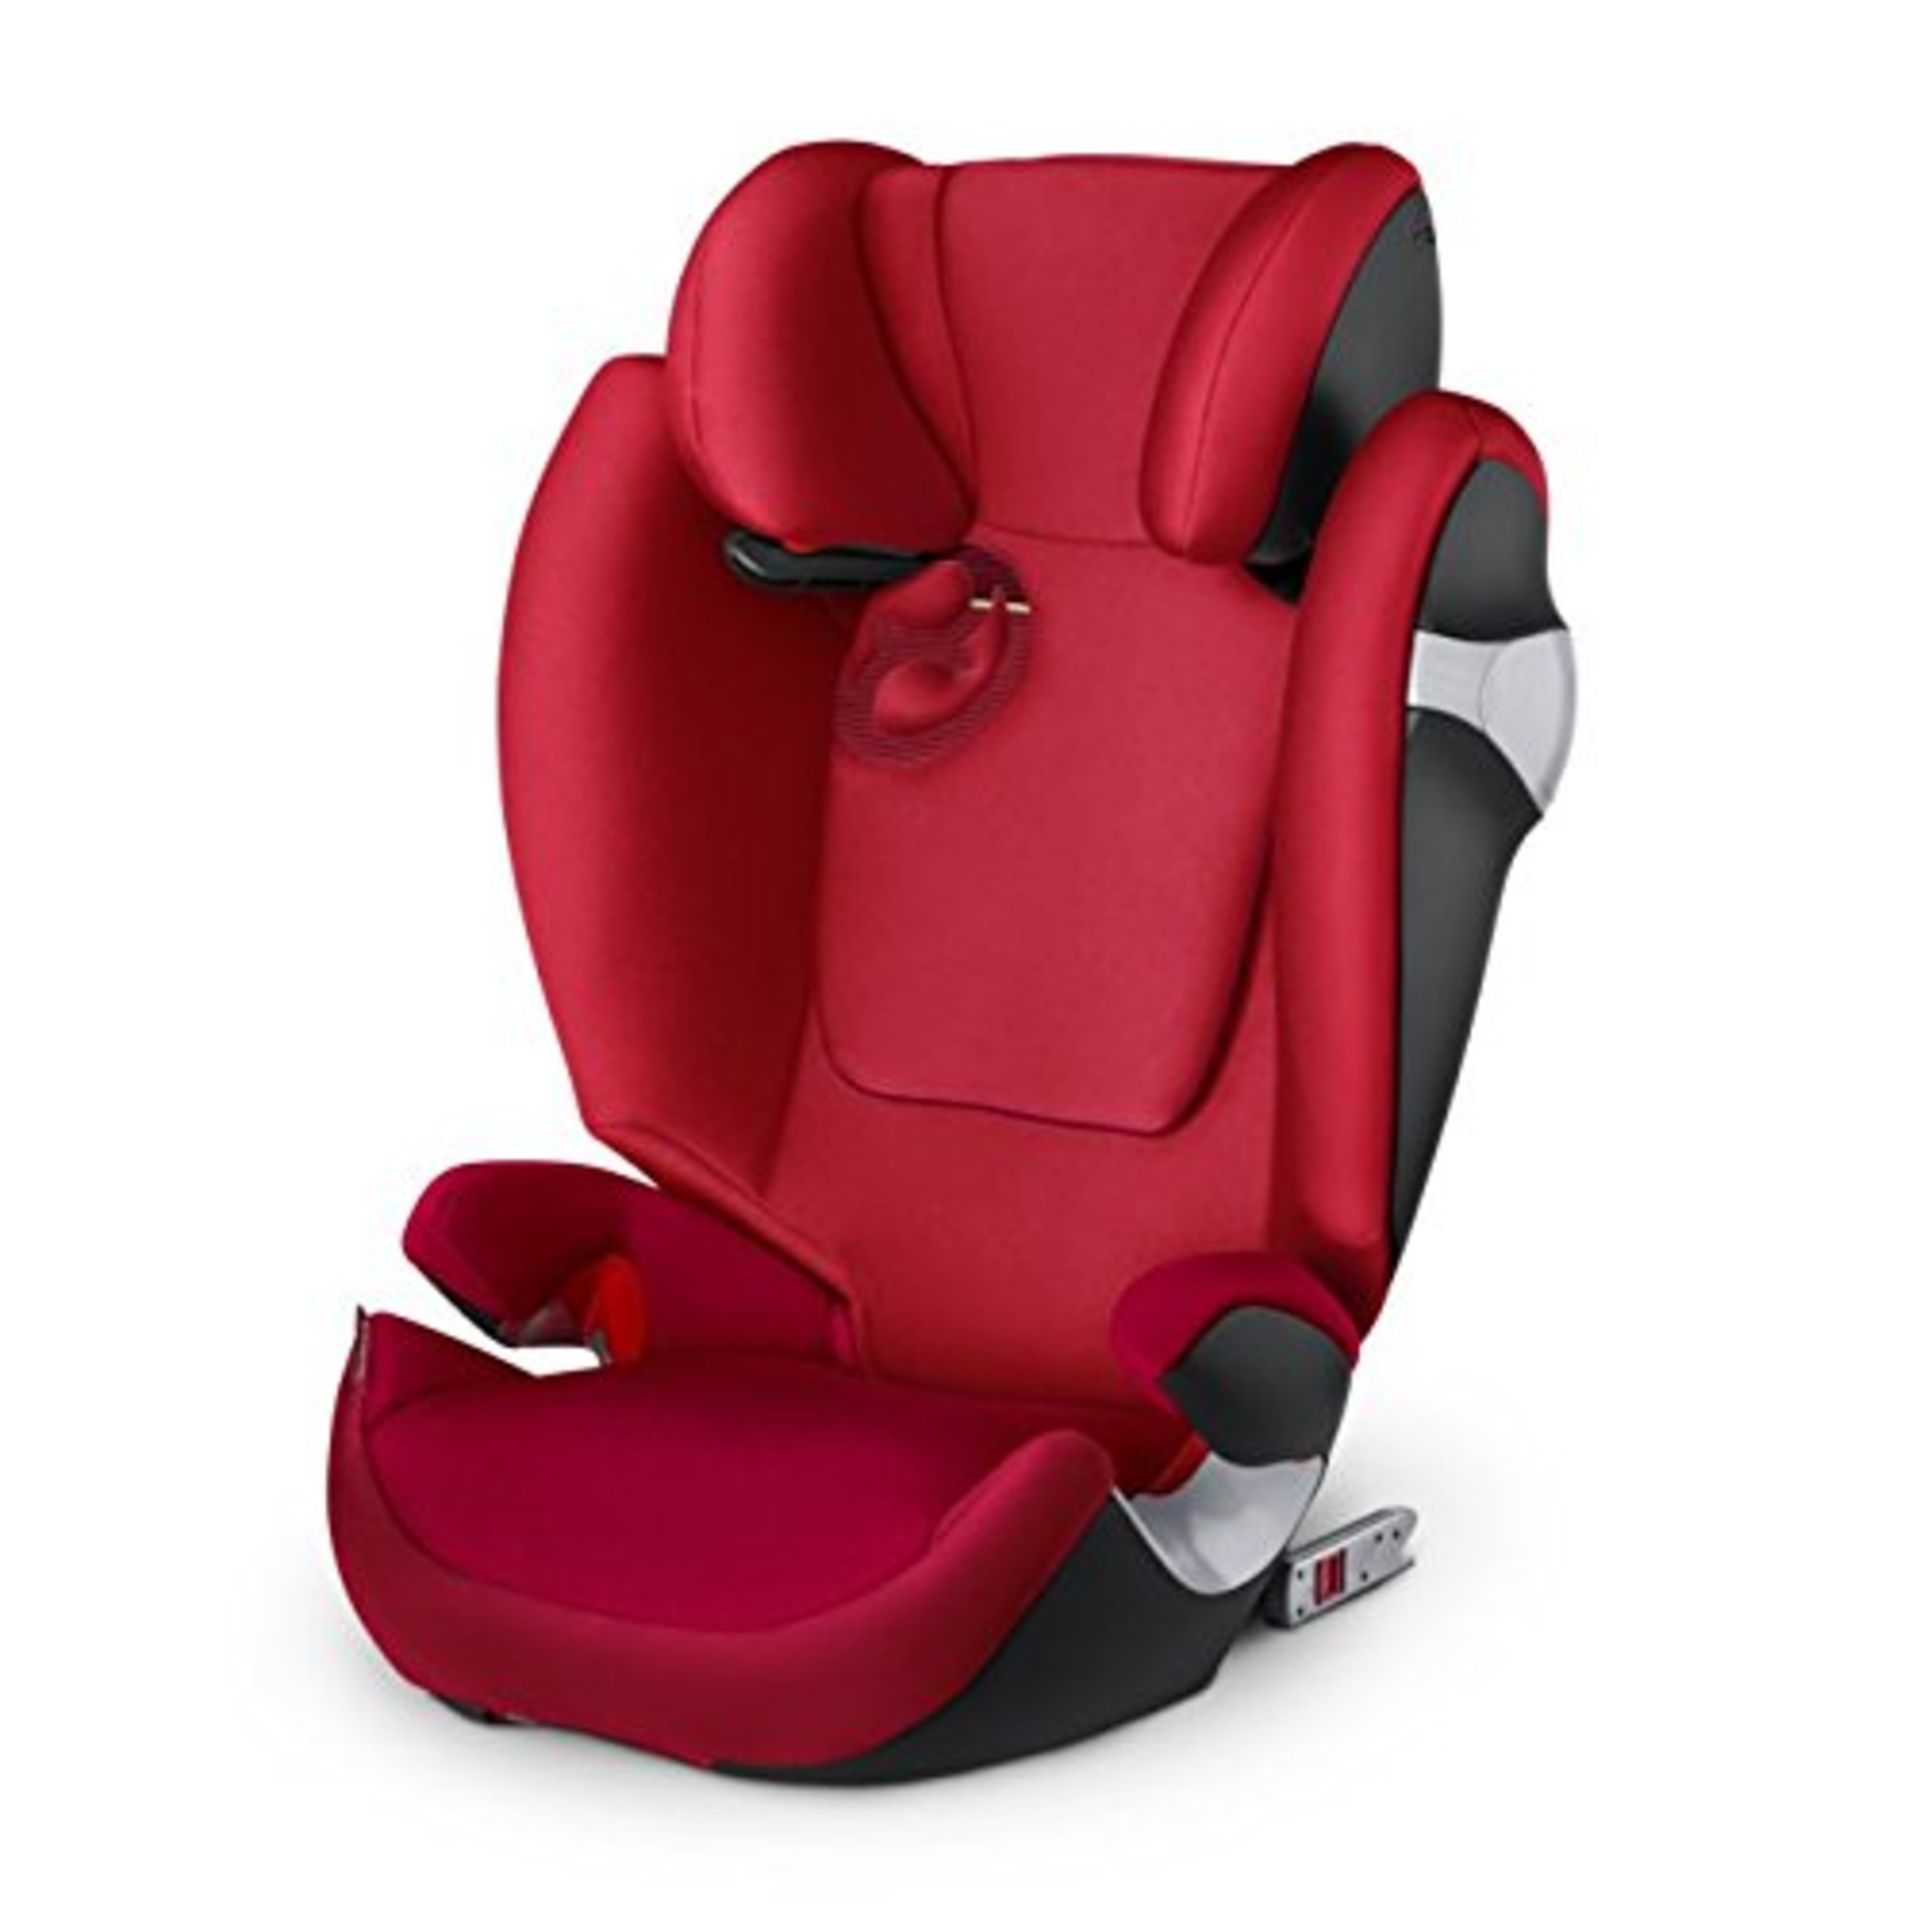 BRAND NEW CYBEX Solution M-Fix, Toddler Car Seat RRP £159.99